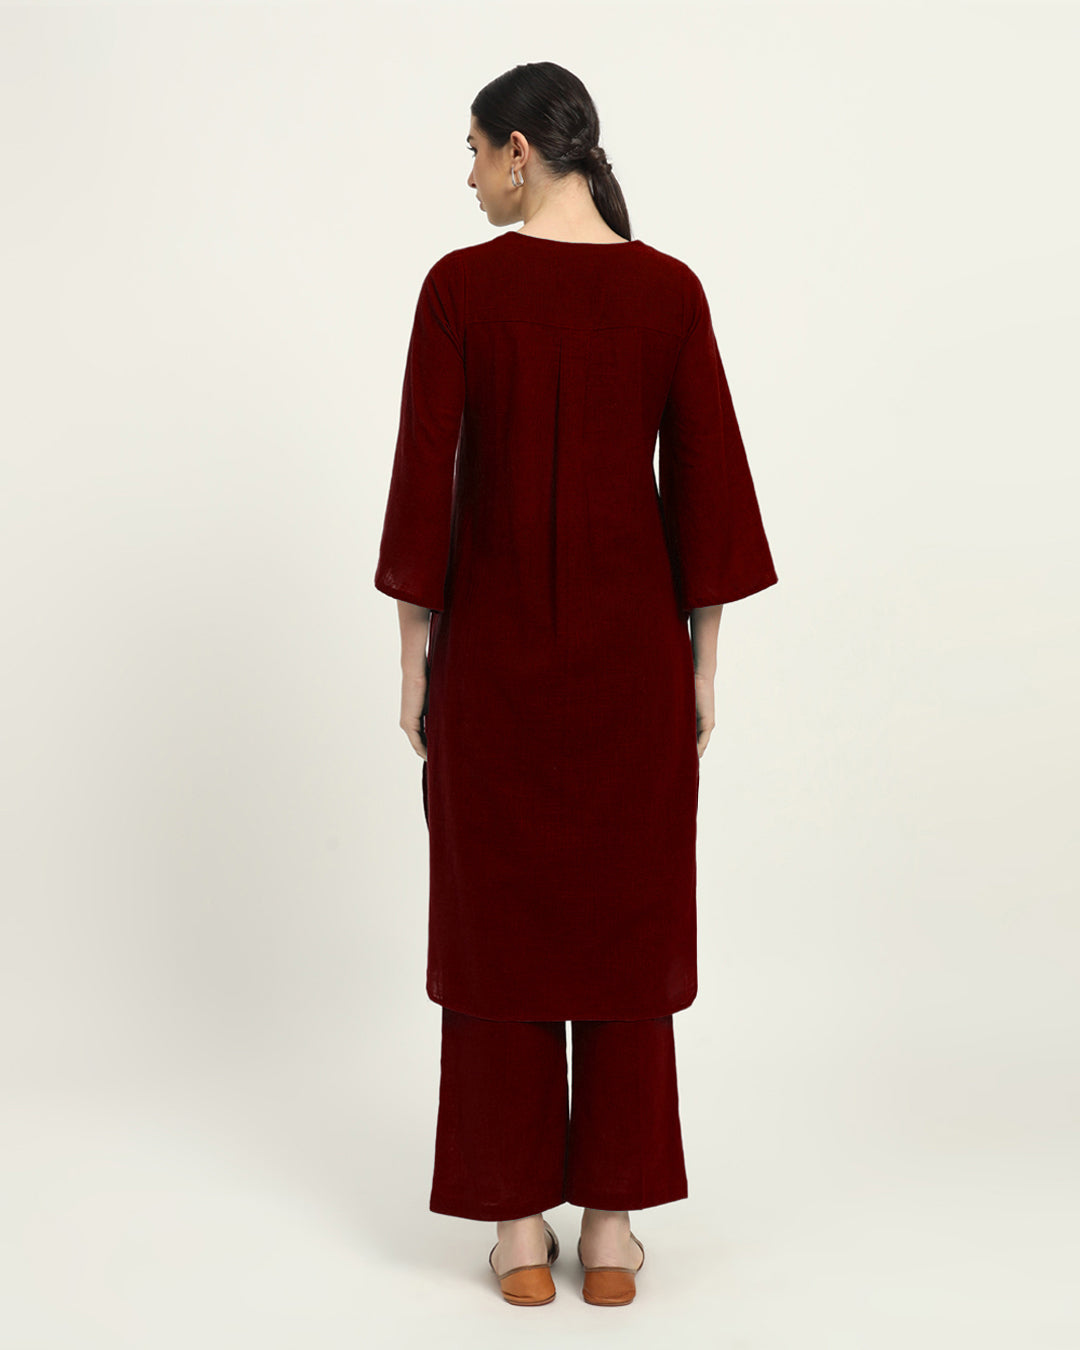 Russet Red Rounded Reverie Solid Kurta (Without Bottoms)